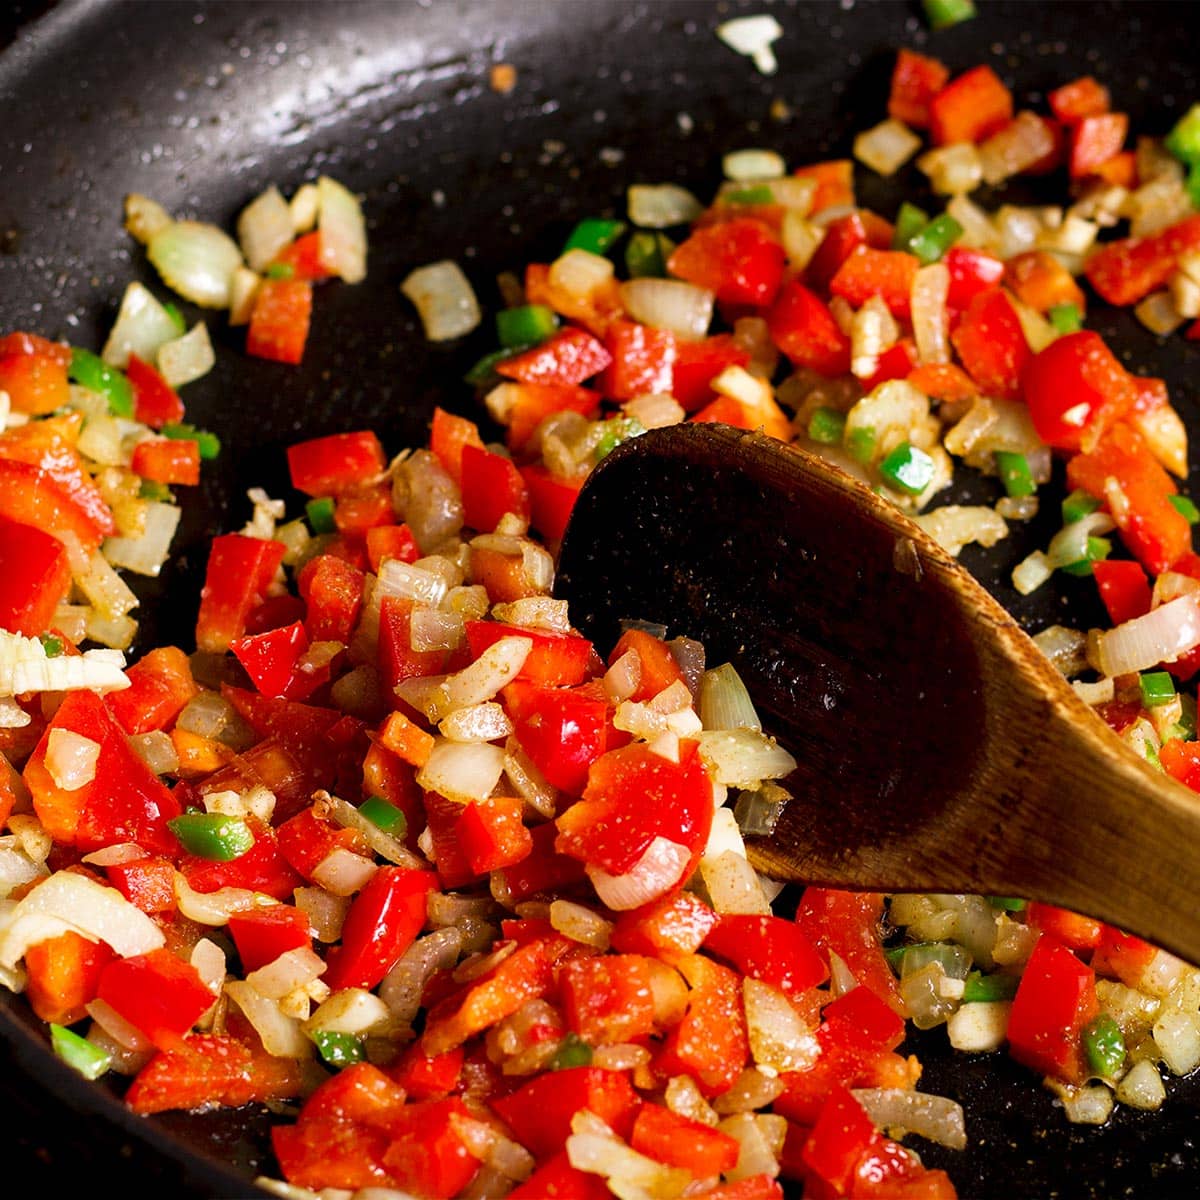 Using a wooden spoon to stir chopped red bell pepper, onion, garlic, and jalapeno in a skillet.